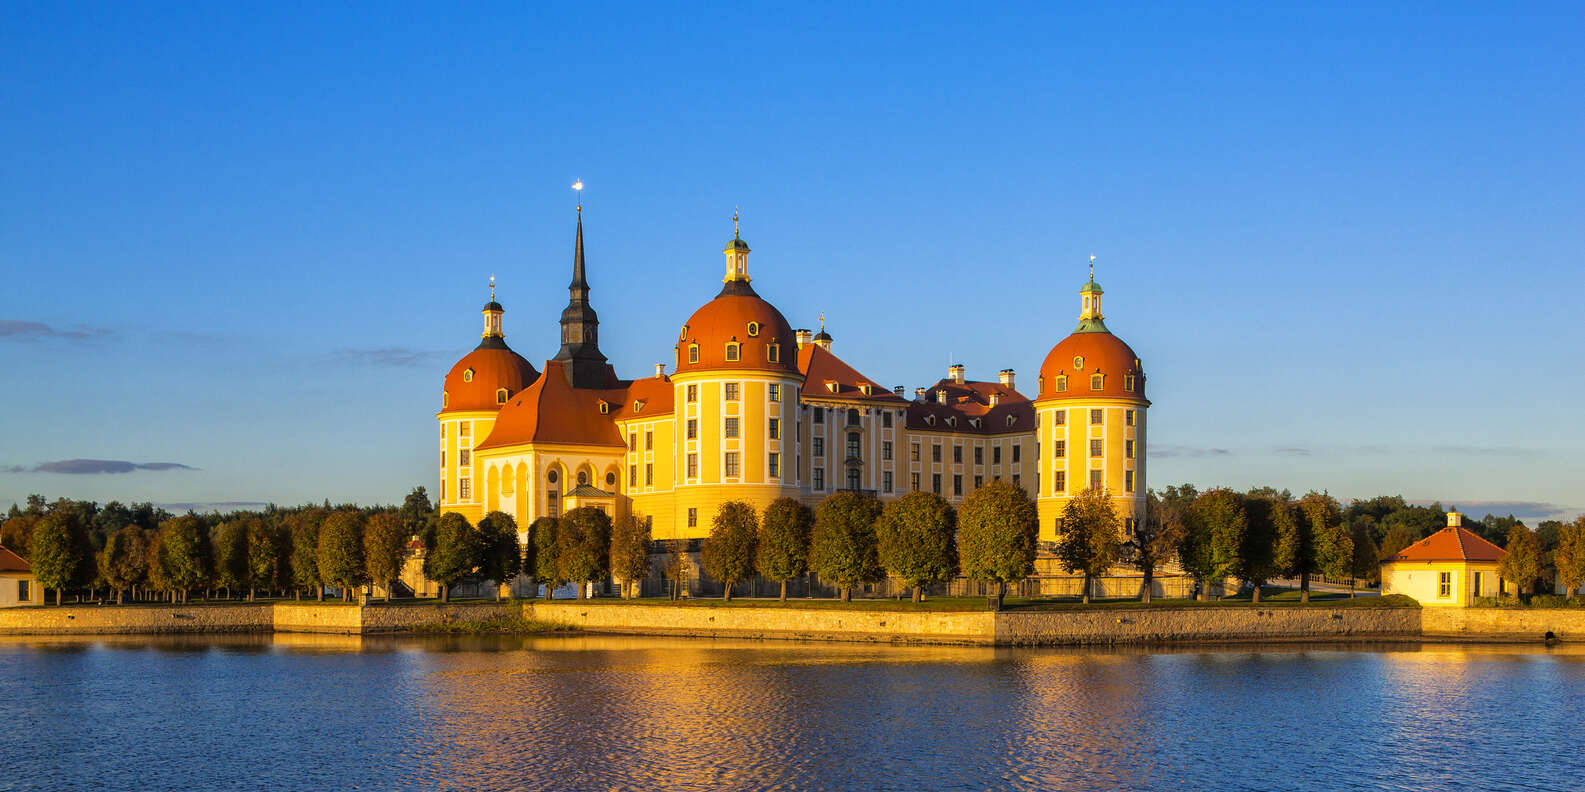 What to do in Moritzburg